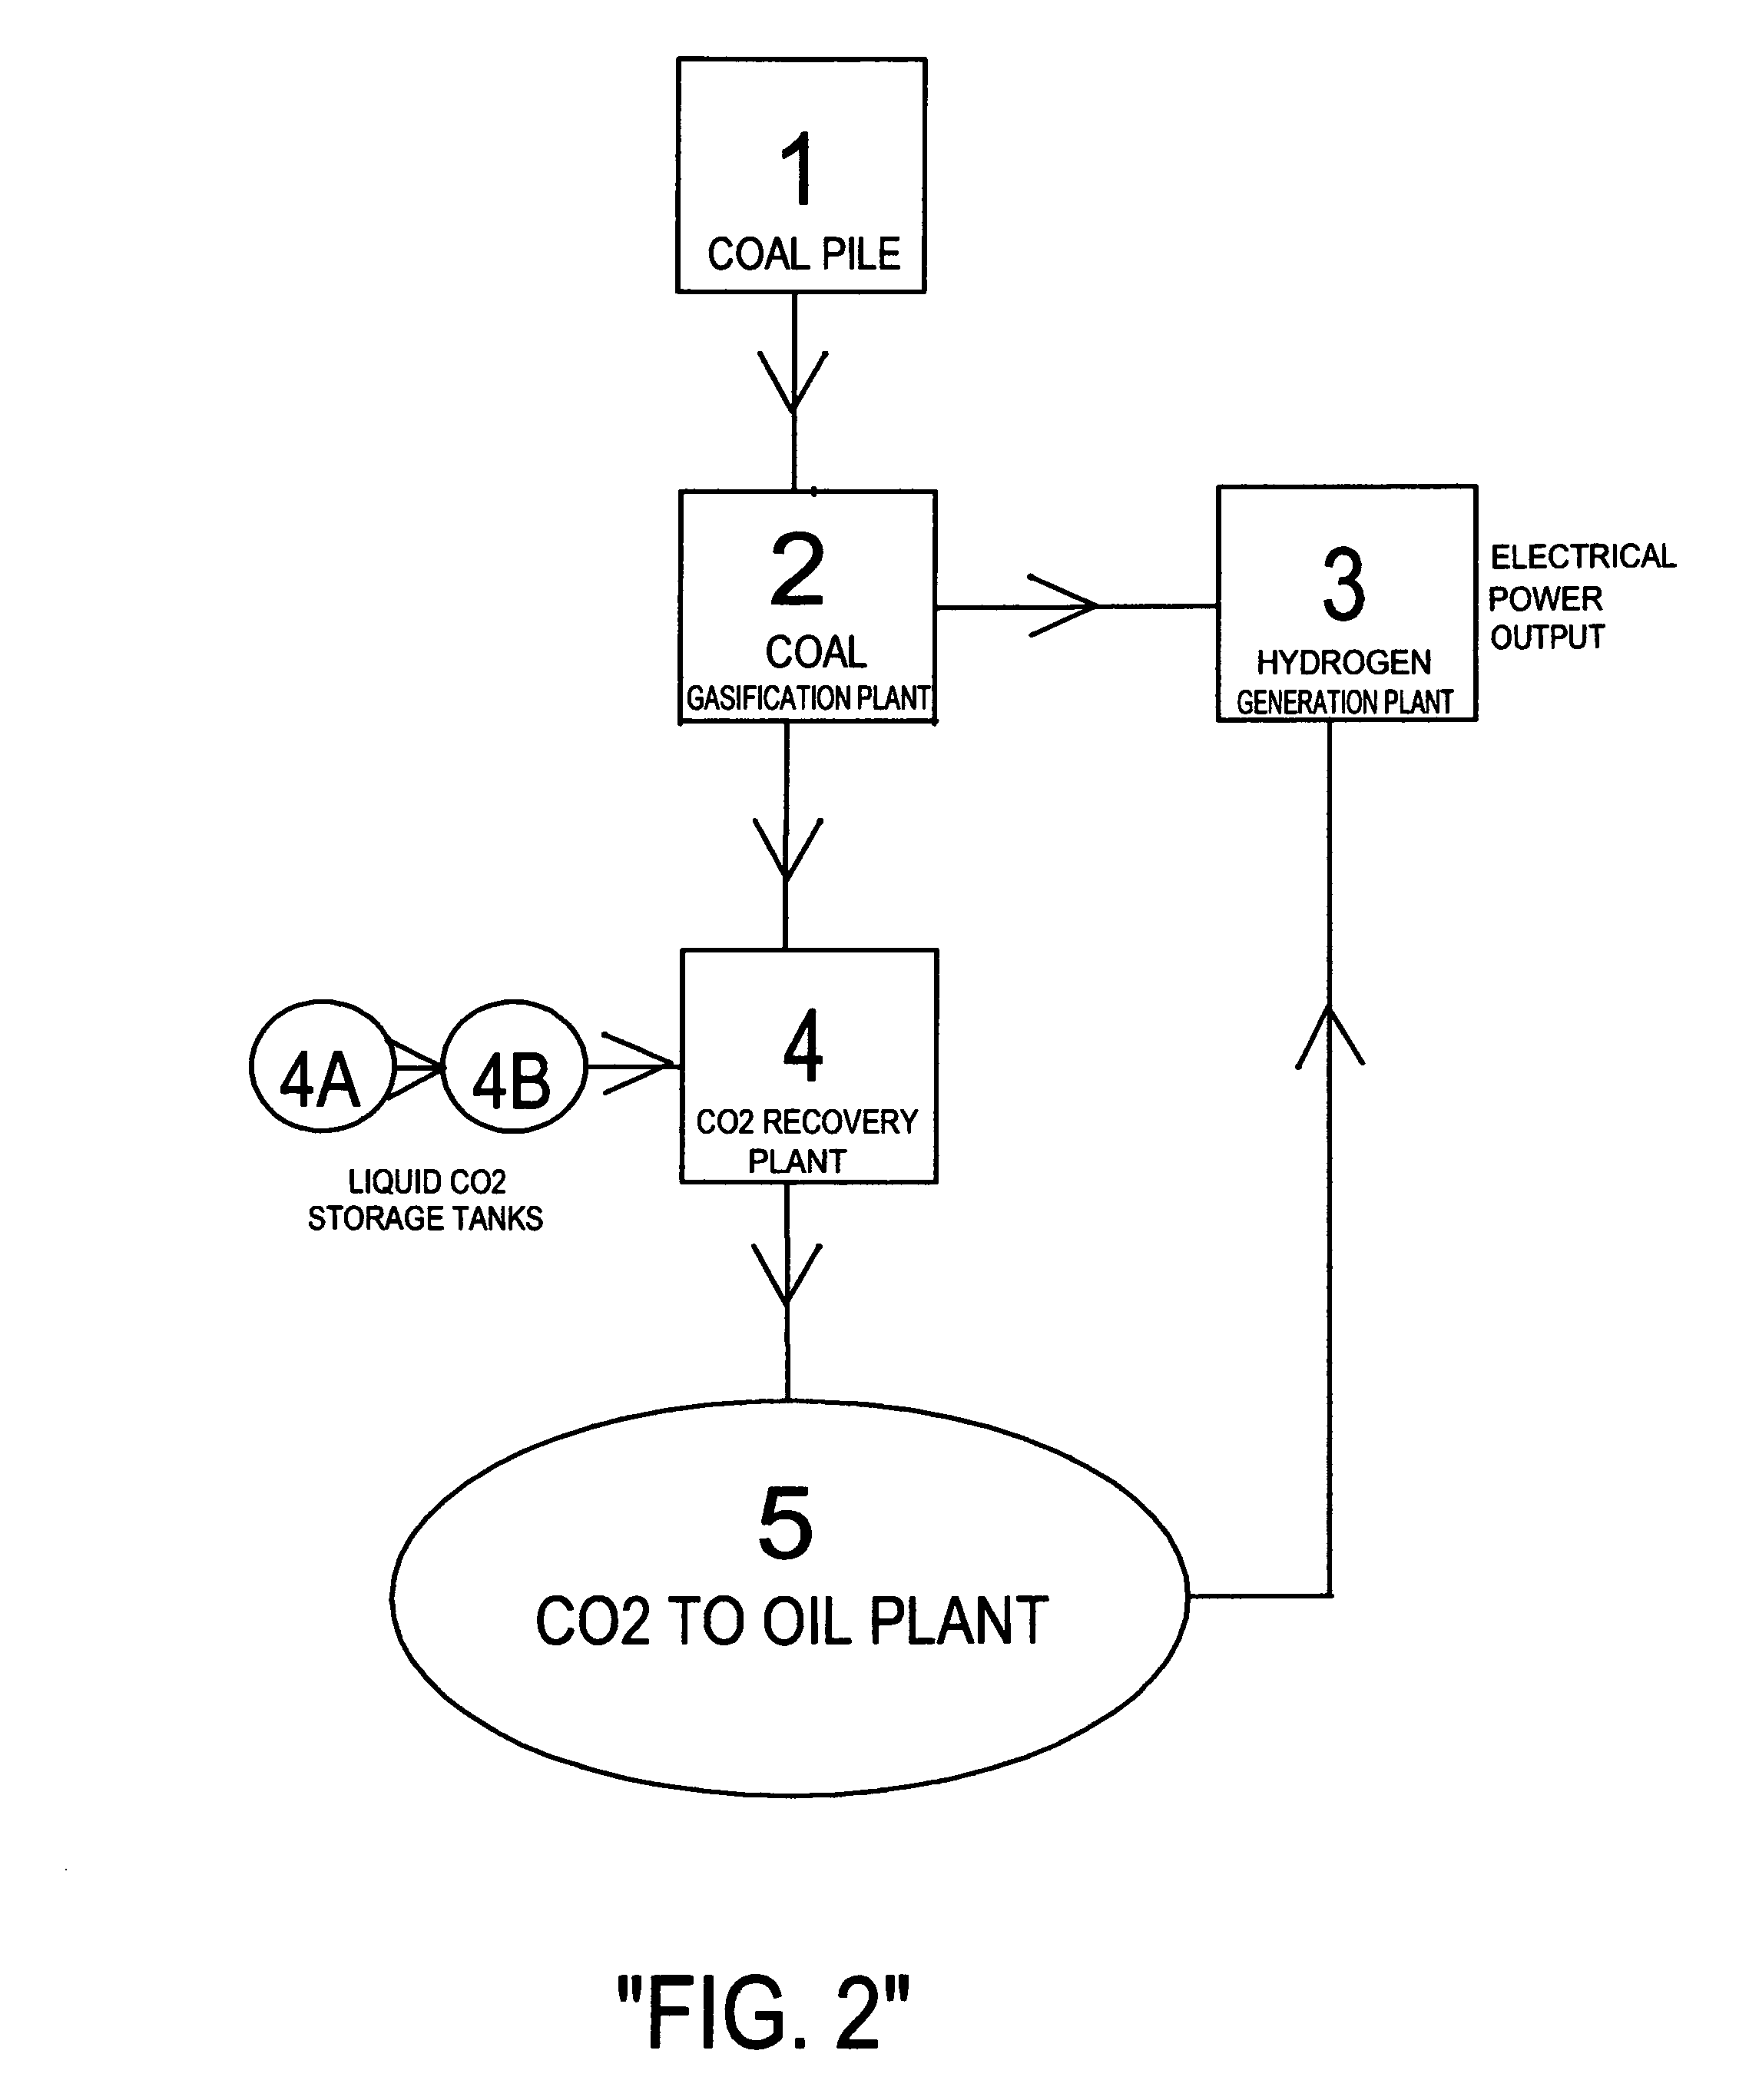 Method for capture carbon and storage (CCS process) from coal fuel gas and the storage as biofuels: oil, gasoline, biodiesel, jet fuel, ethanol, and methane